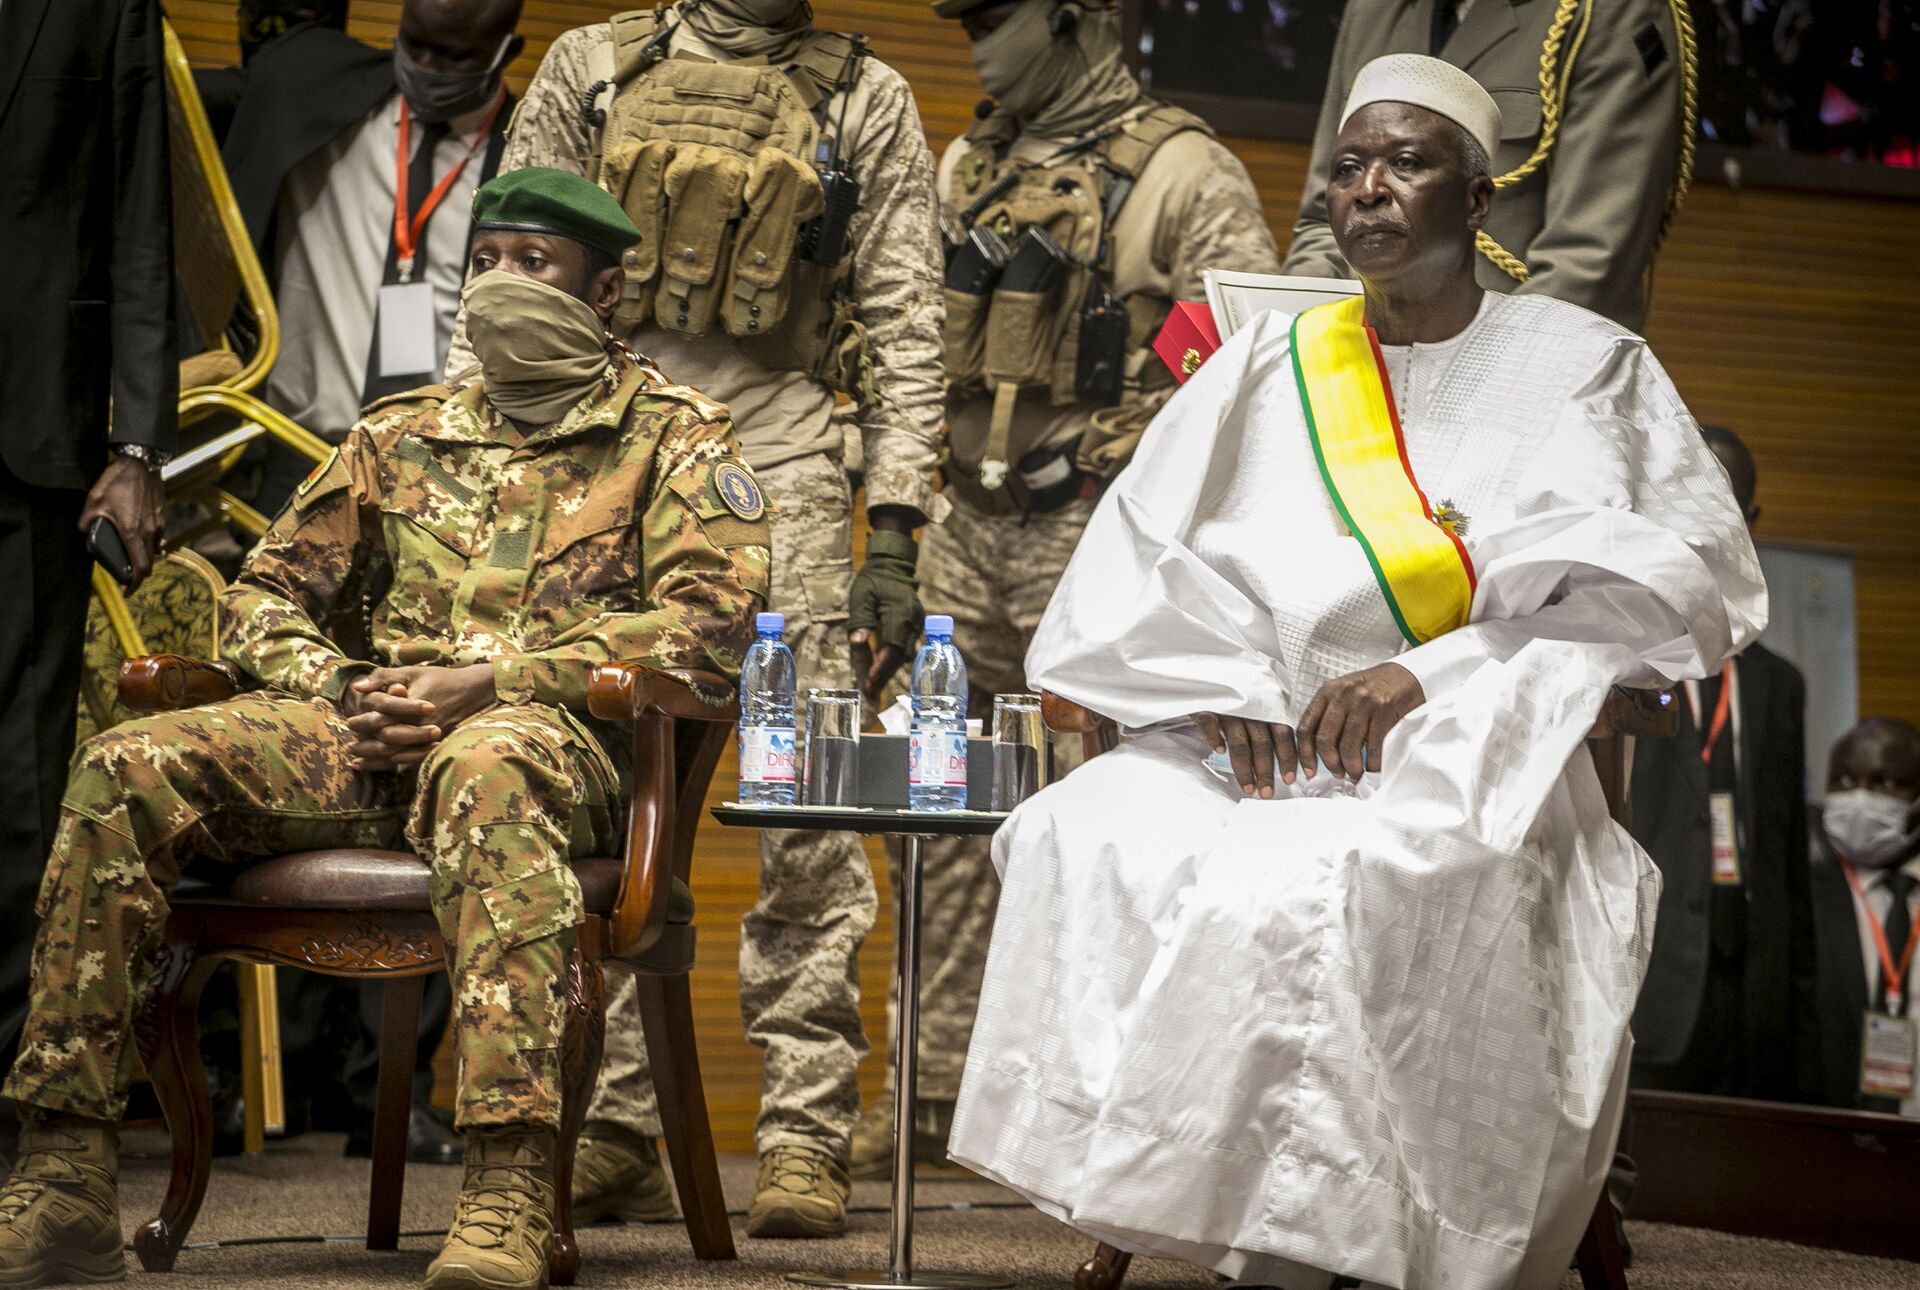 African Union Suspends Mali After Second Military Coup, Threatens Sanctions - Sputnik International, 1920, 01.06.2021